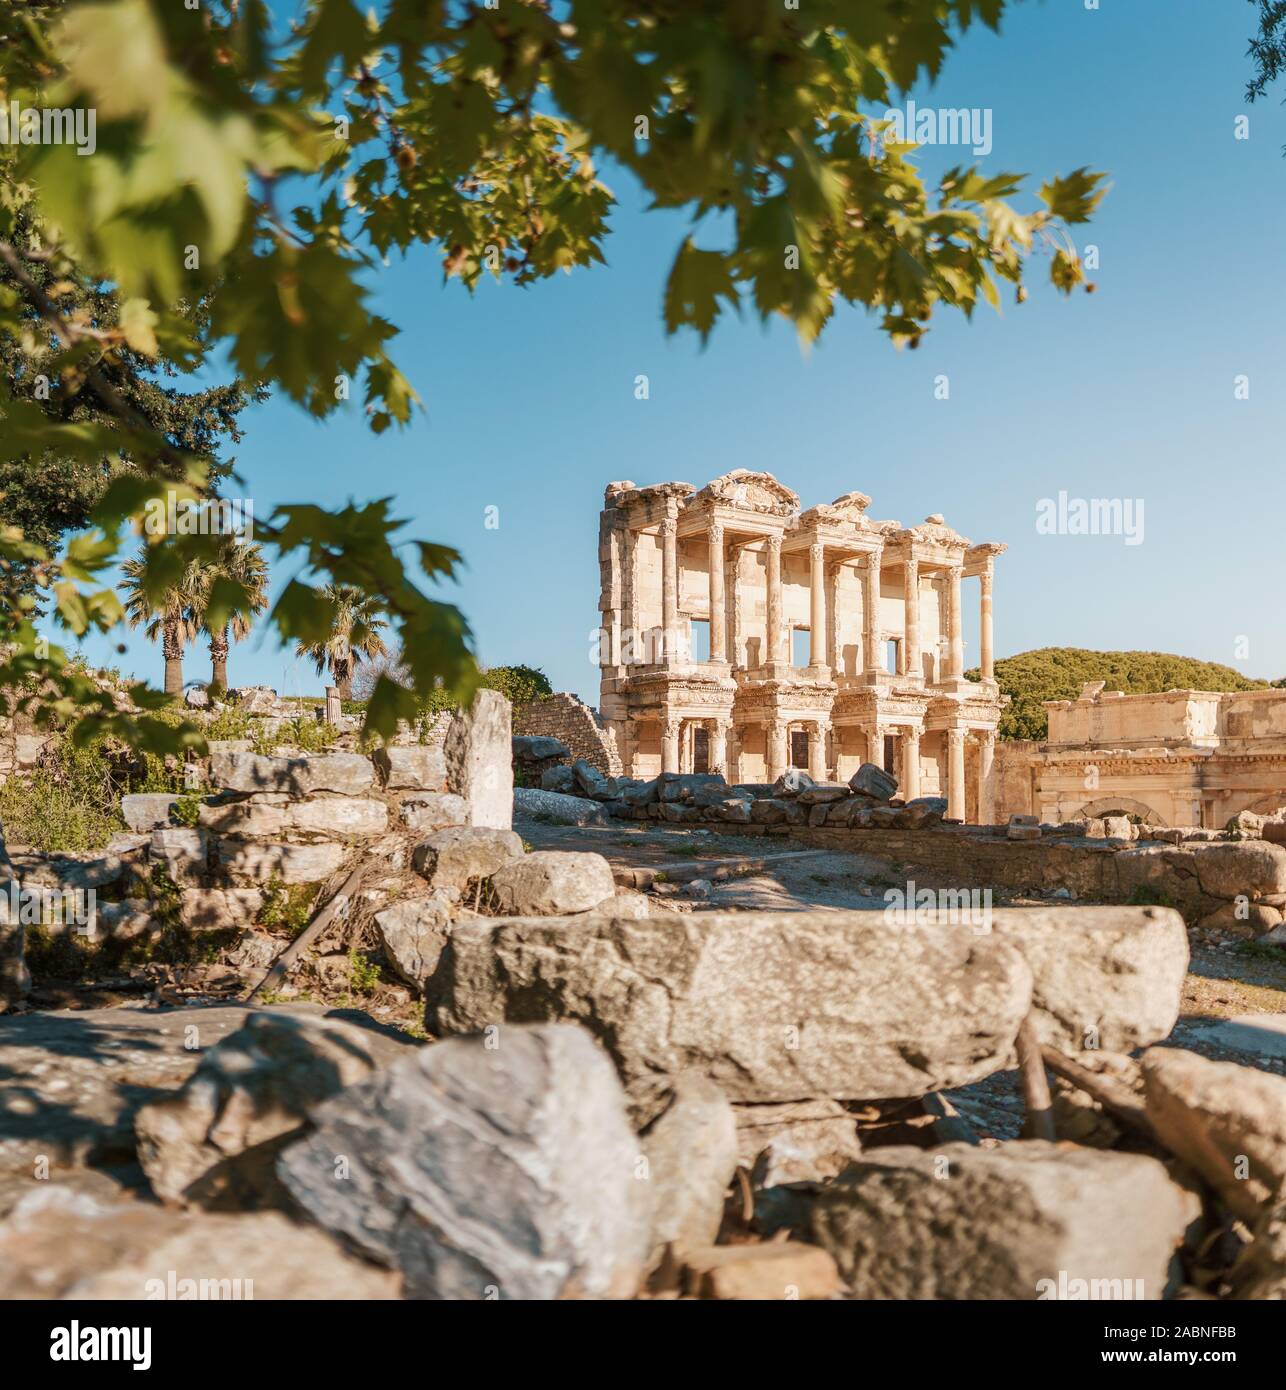 Library of Celsus, Ruins of ancient Ephesus, Turkey Stock Photo